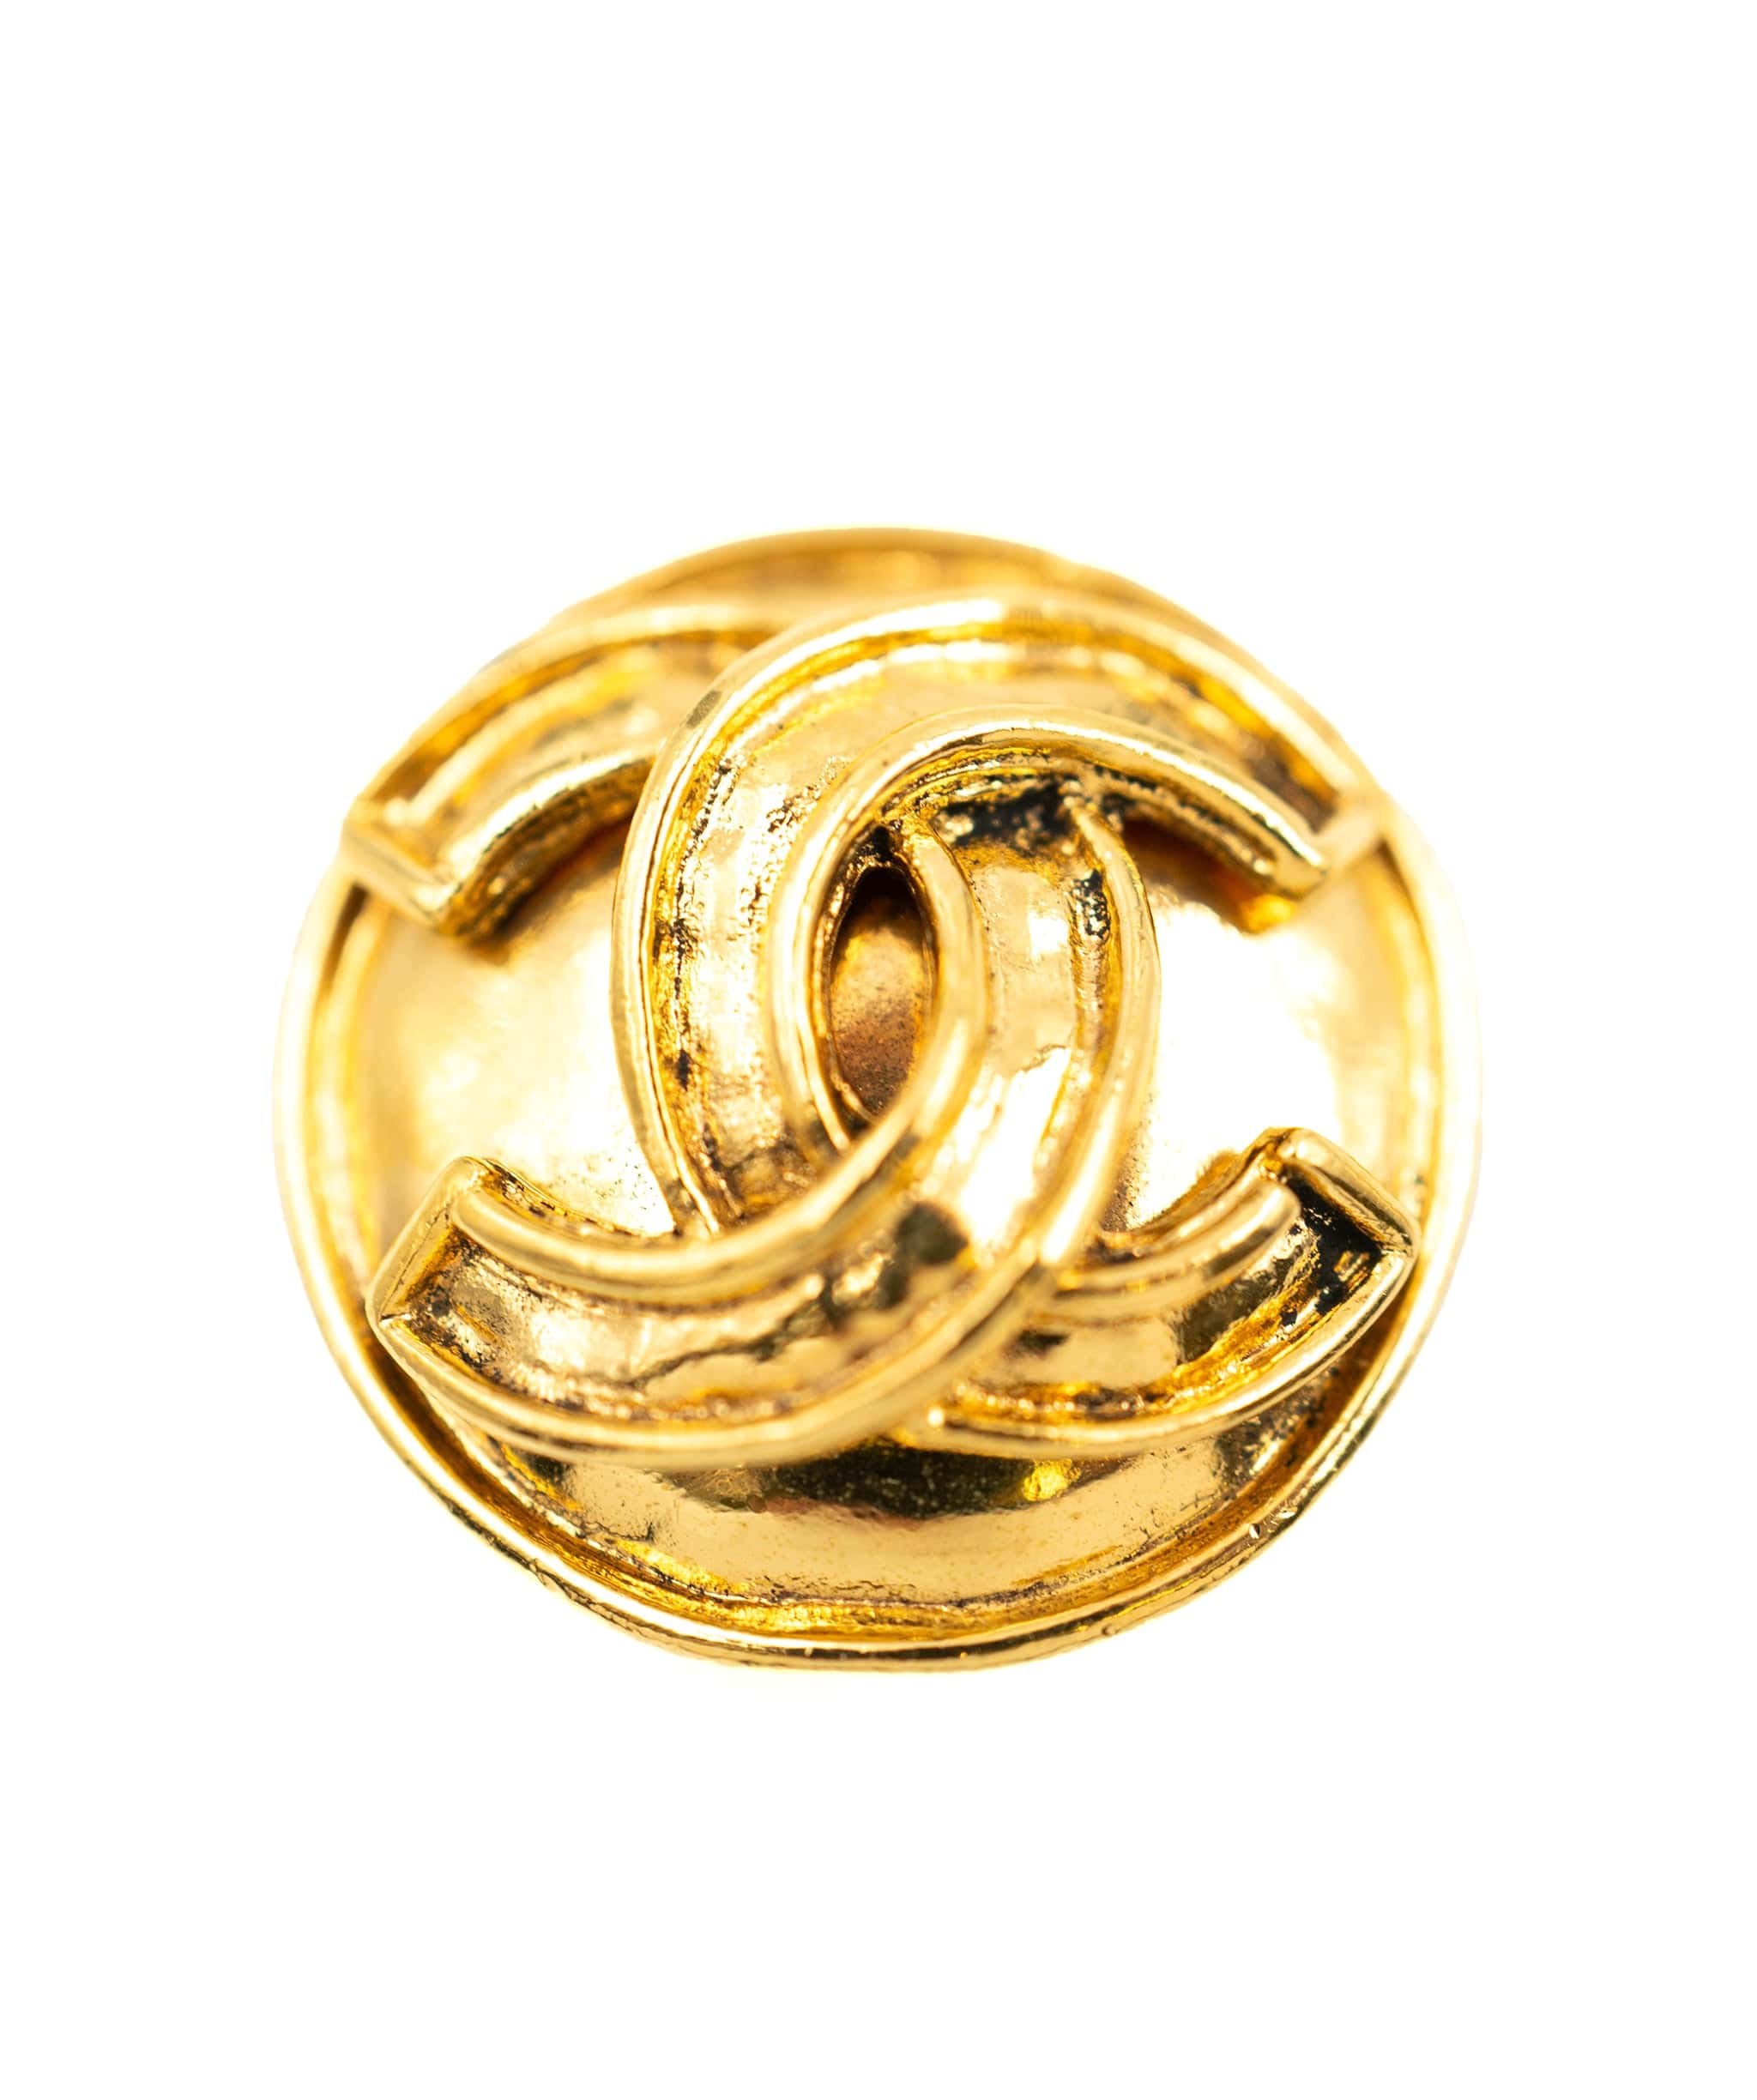 Chanel Chanel CC GOLD earrings clip on ASL4302